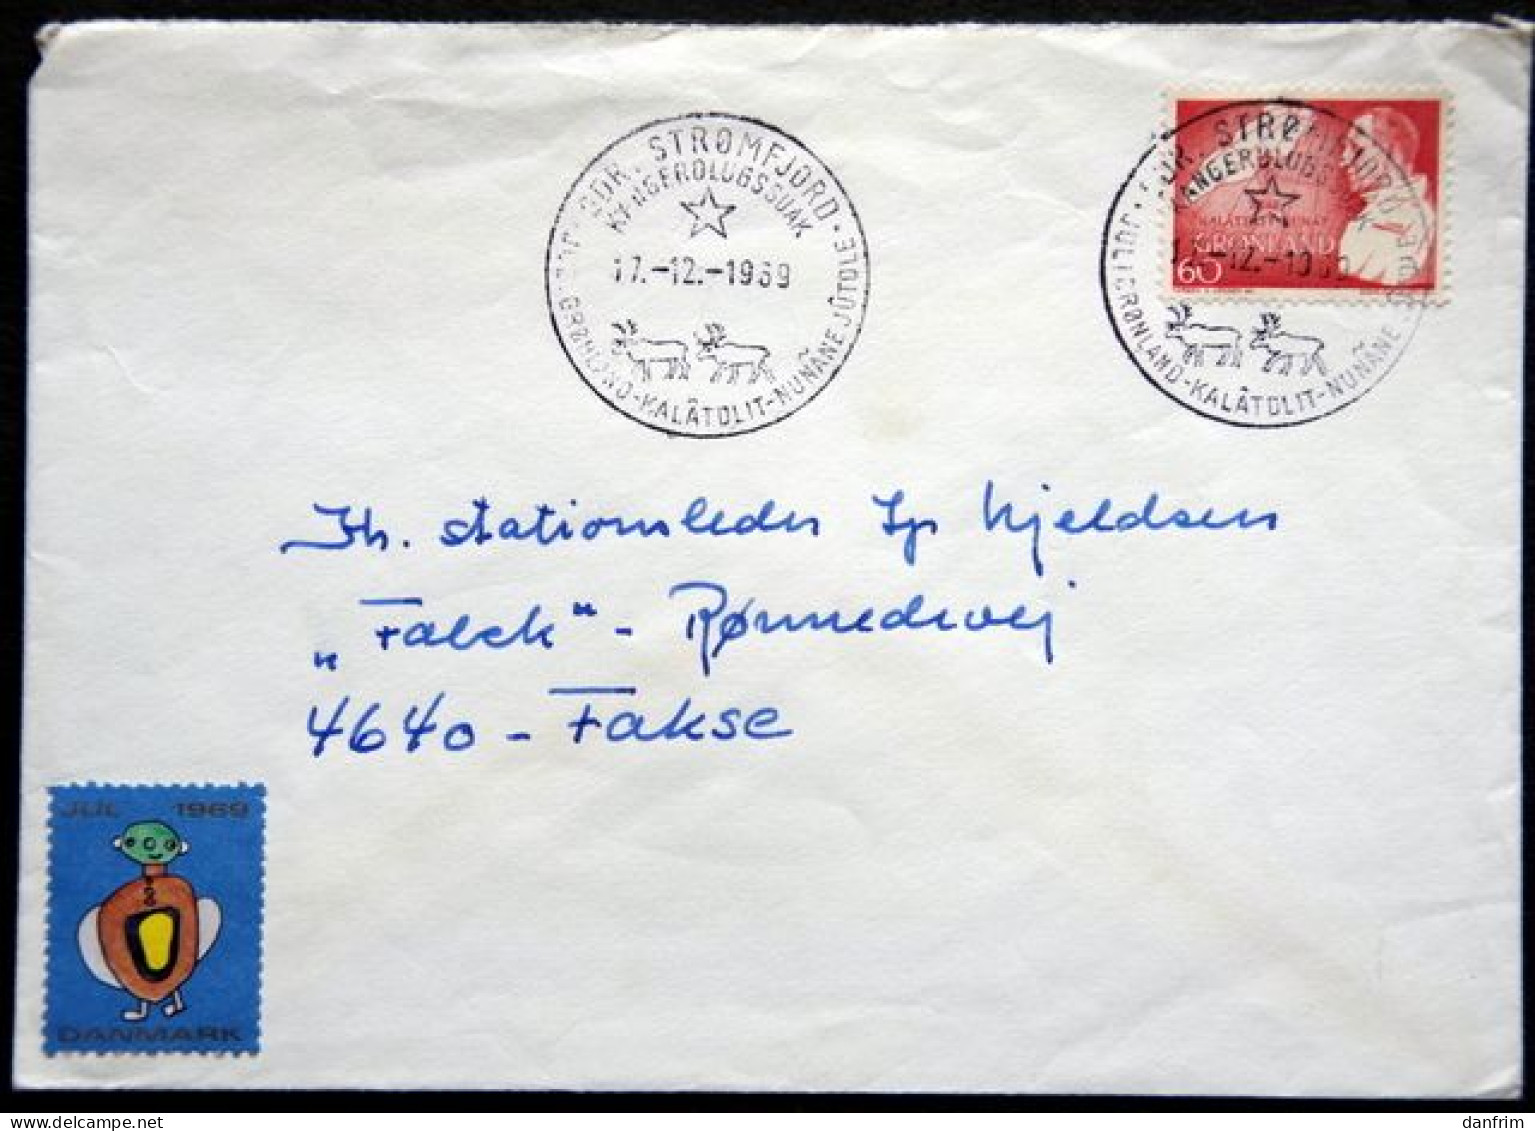 Greenland 1969 Sdr. Strömfjord 17-12-1969 With Special Christmas Cancel  ( Lot 4673 ) - Storia Postale